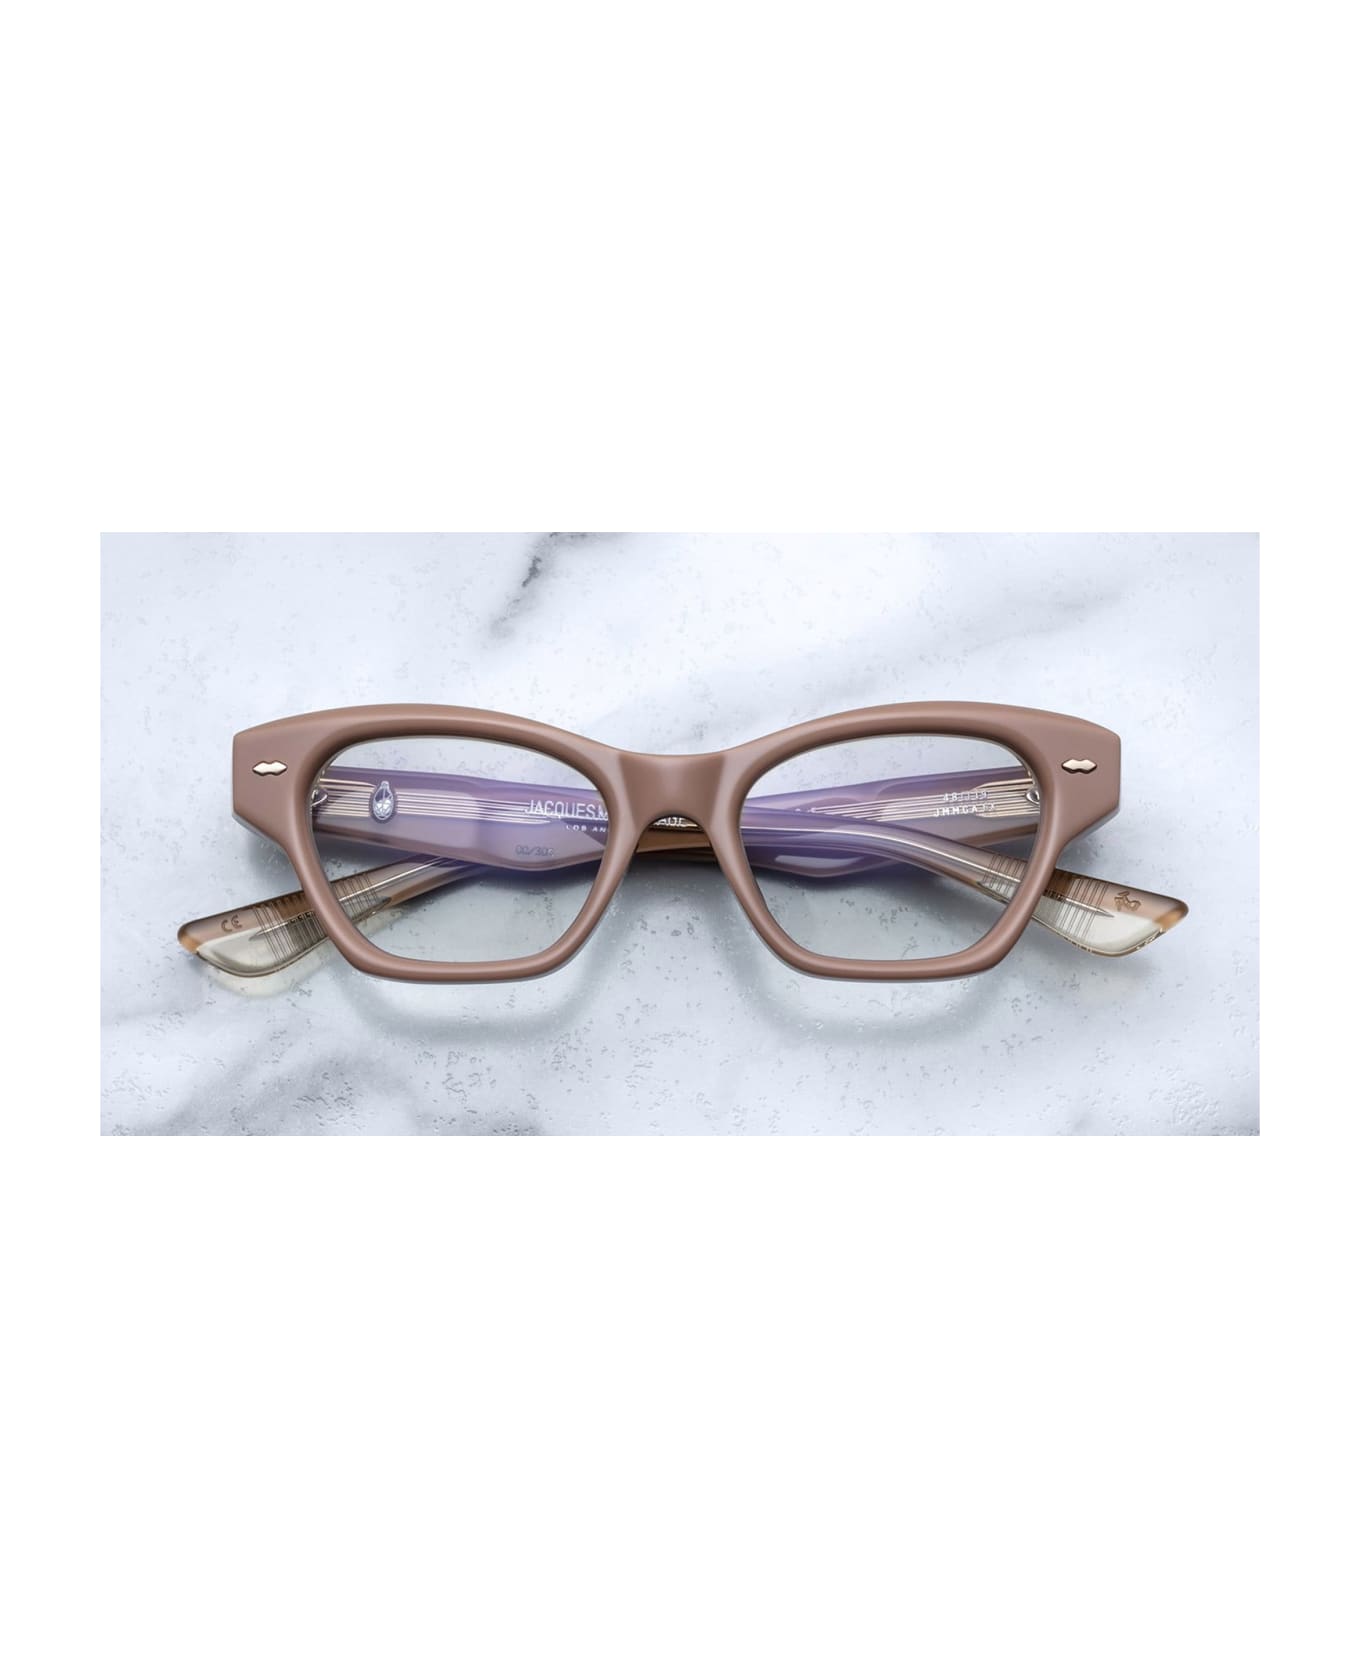 Jacques Marie Mage Grace 2 - Porter Rx Glasses - pink/gold